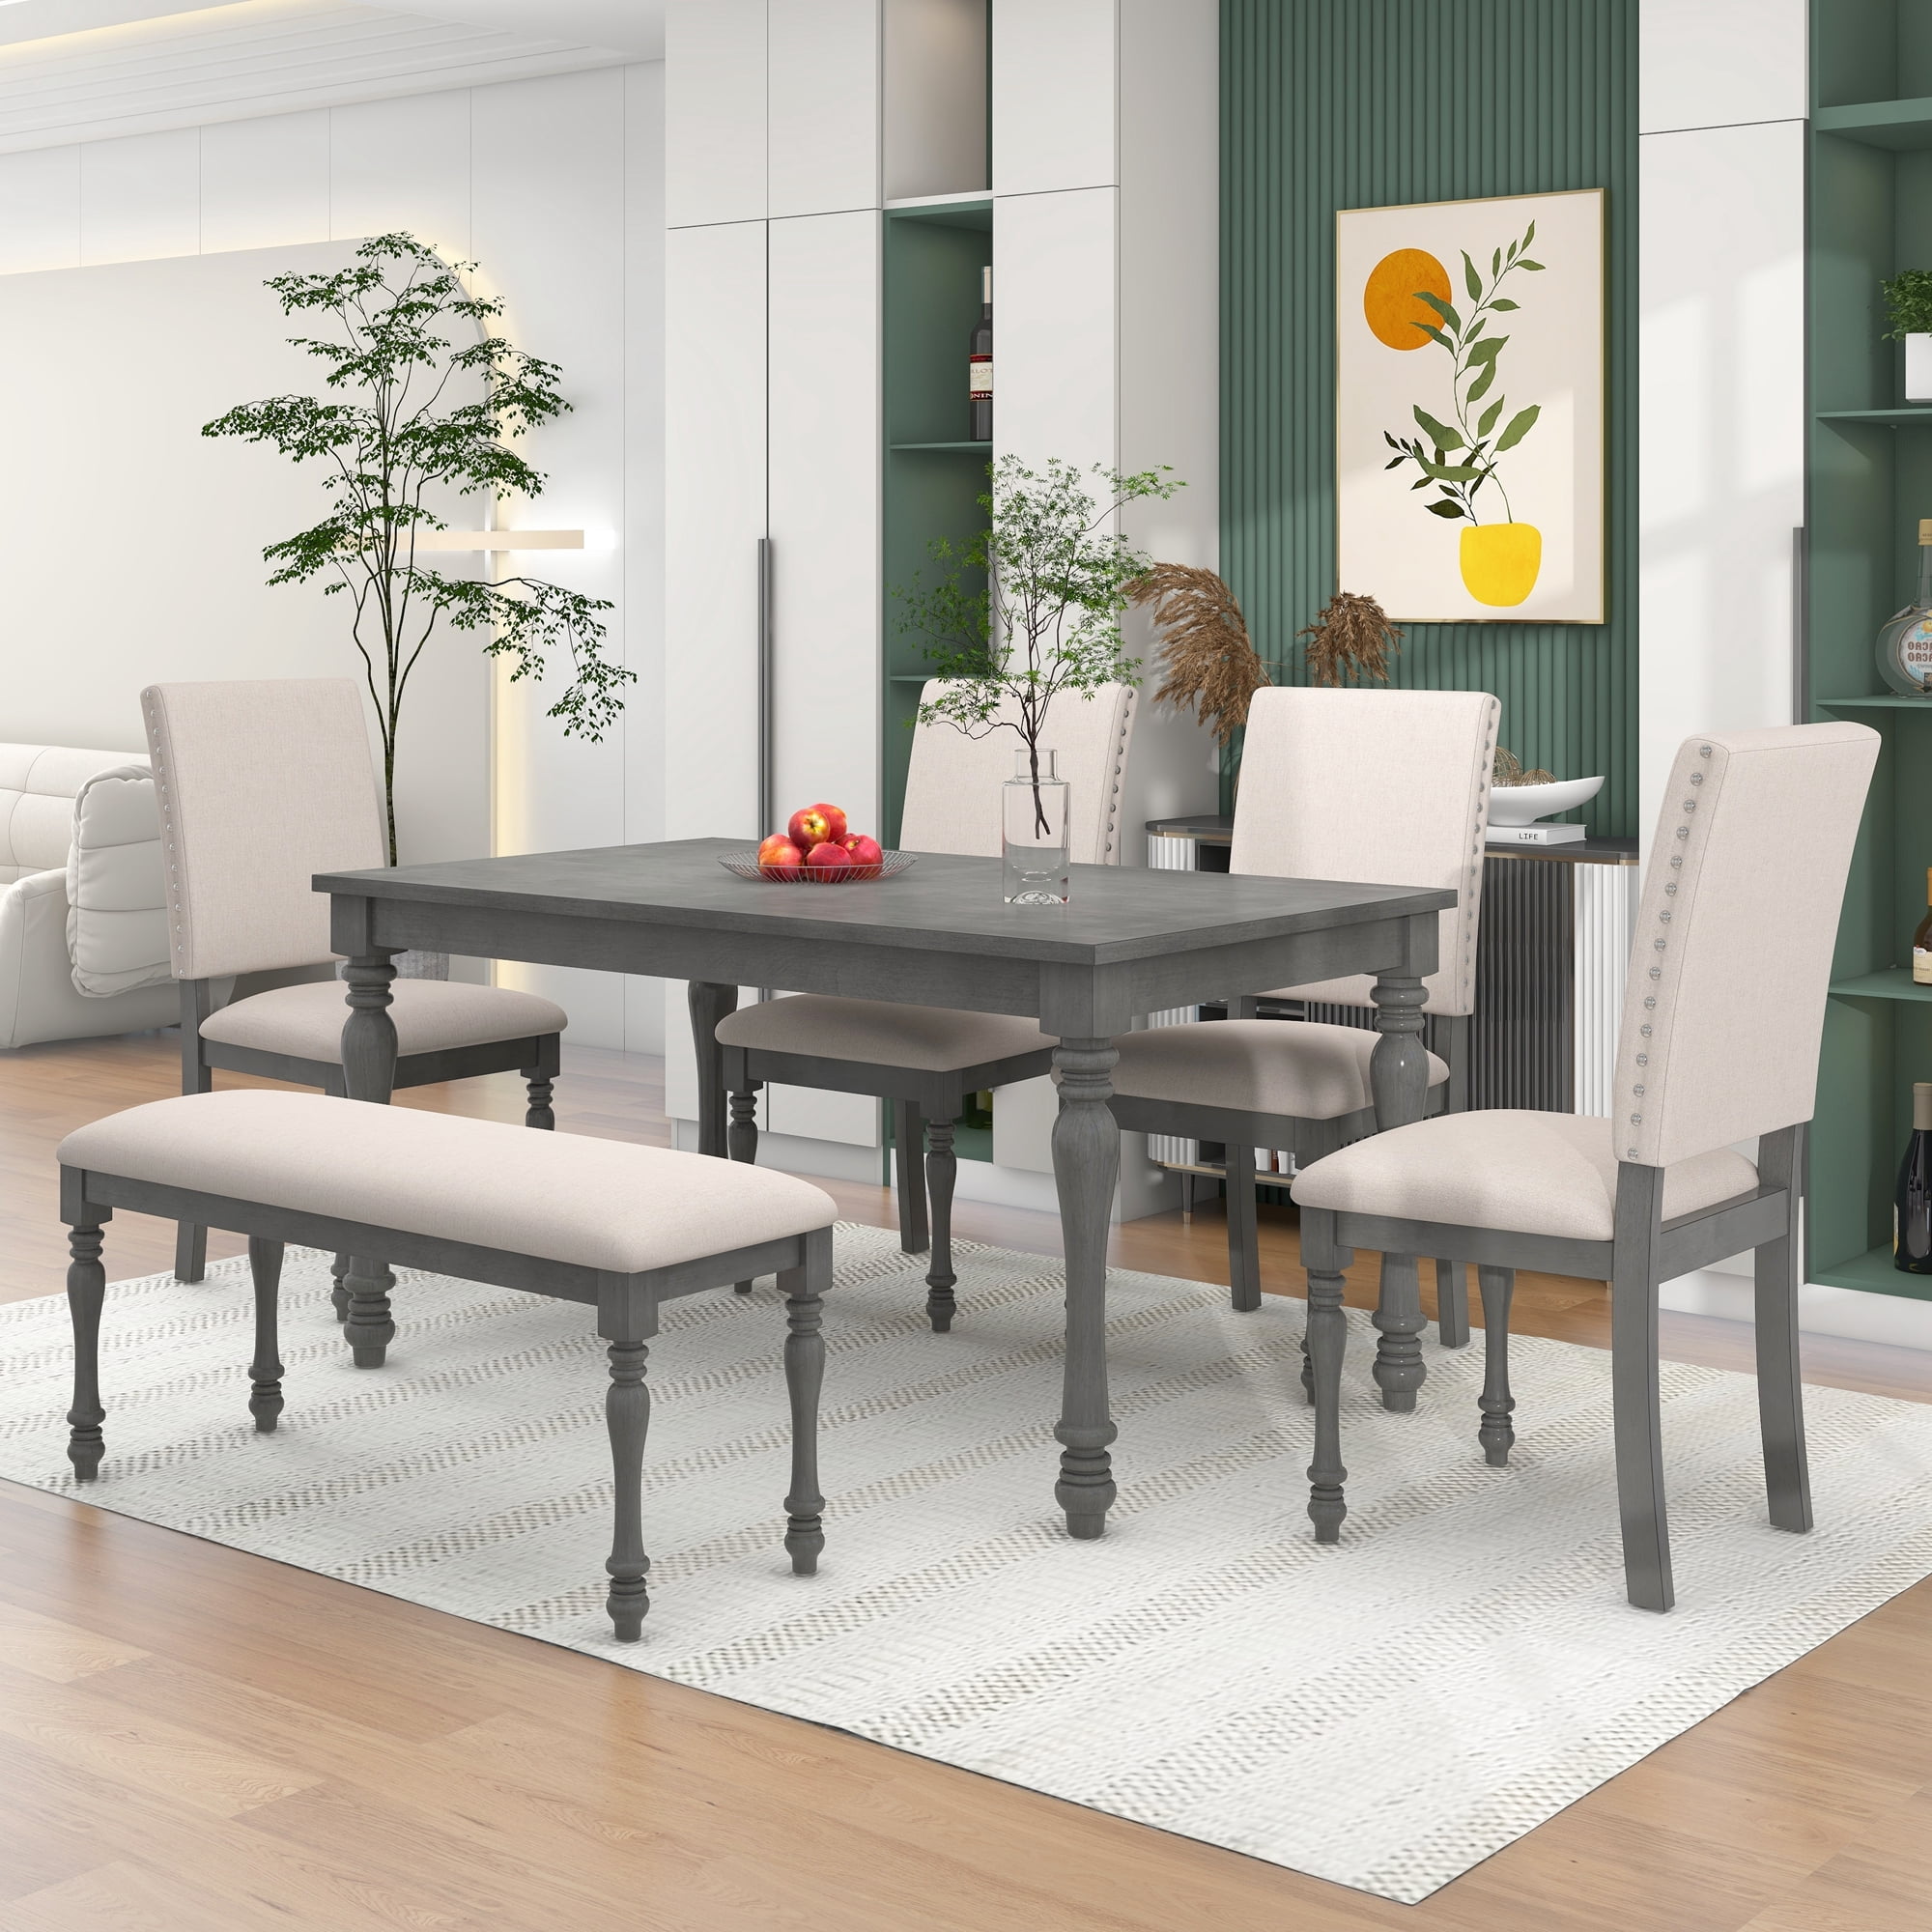 EUROCO 6 Piece Kitchen Dining Table and Chair Set,60” Dining Room Table ...